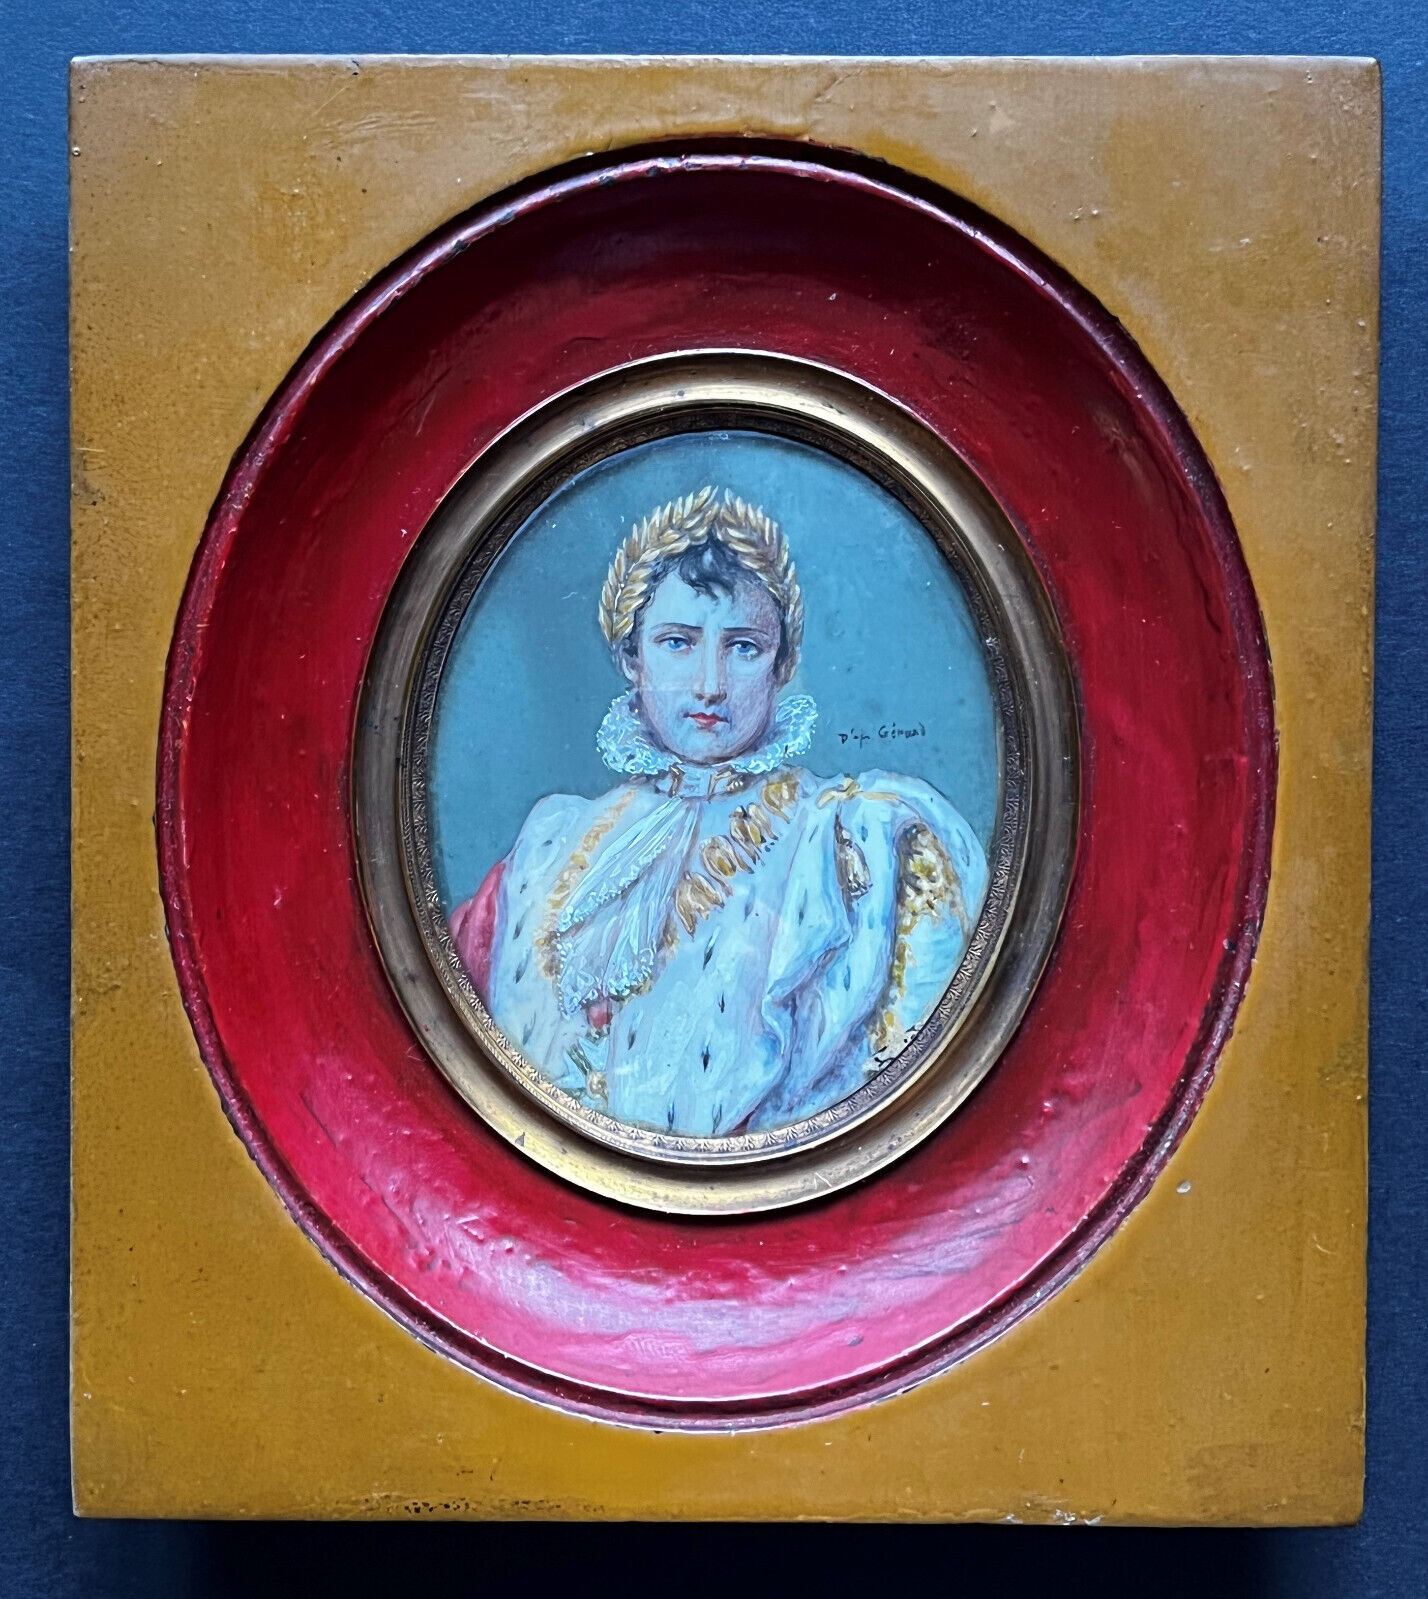 According to François GERARD, miniature of Napoleon I in signed coronation dress, 19th